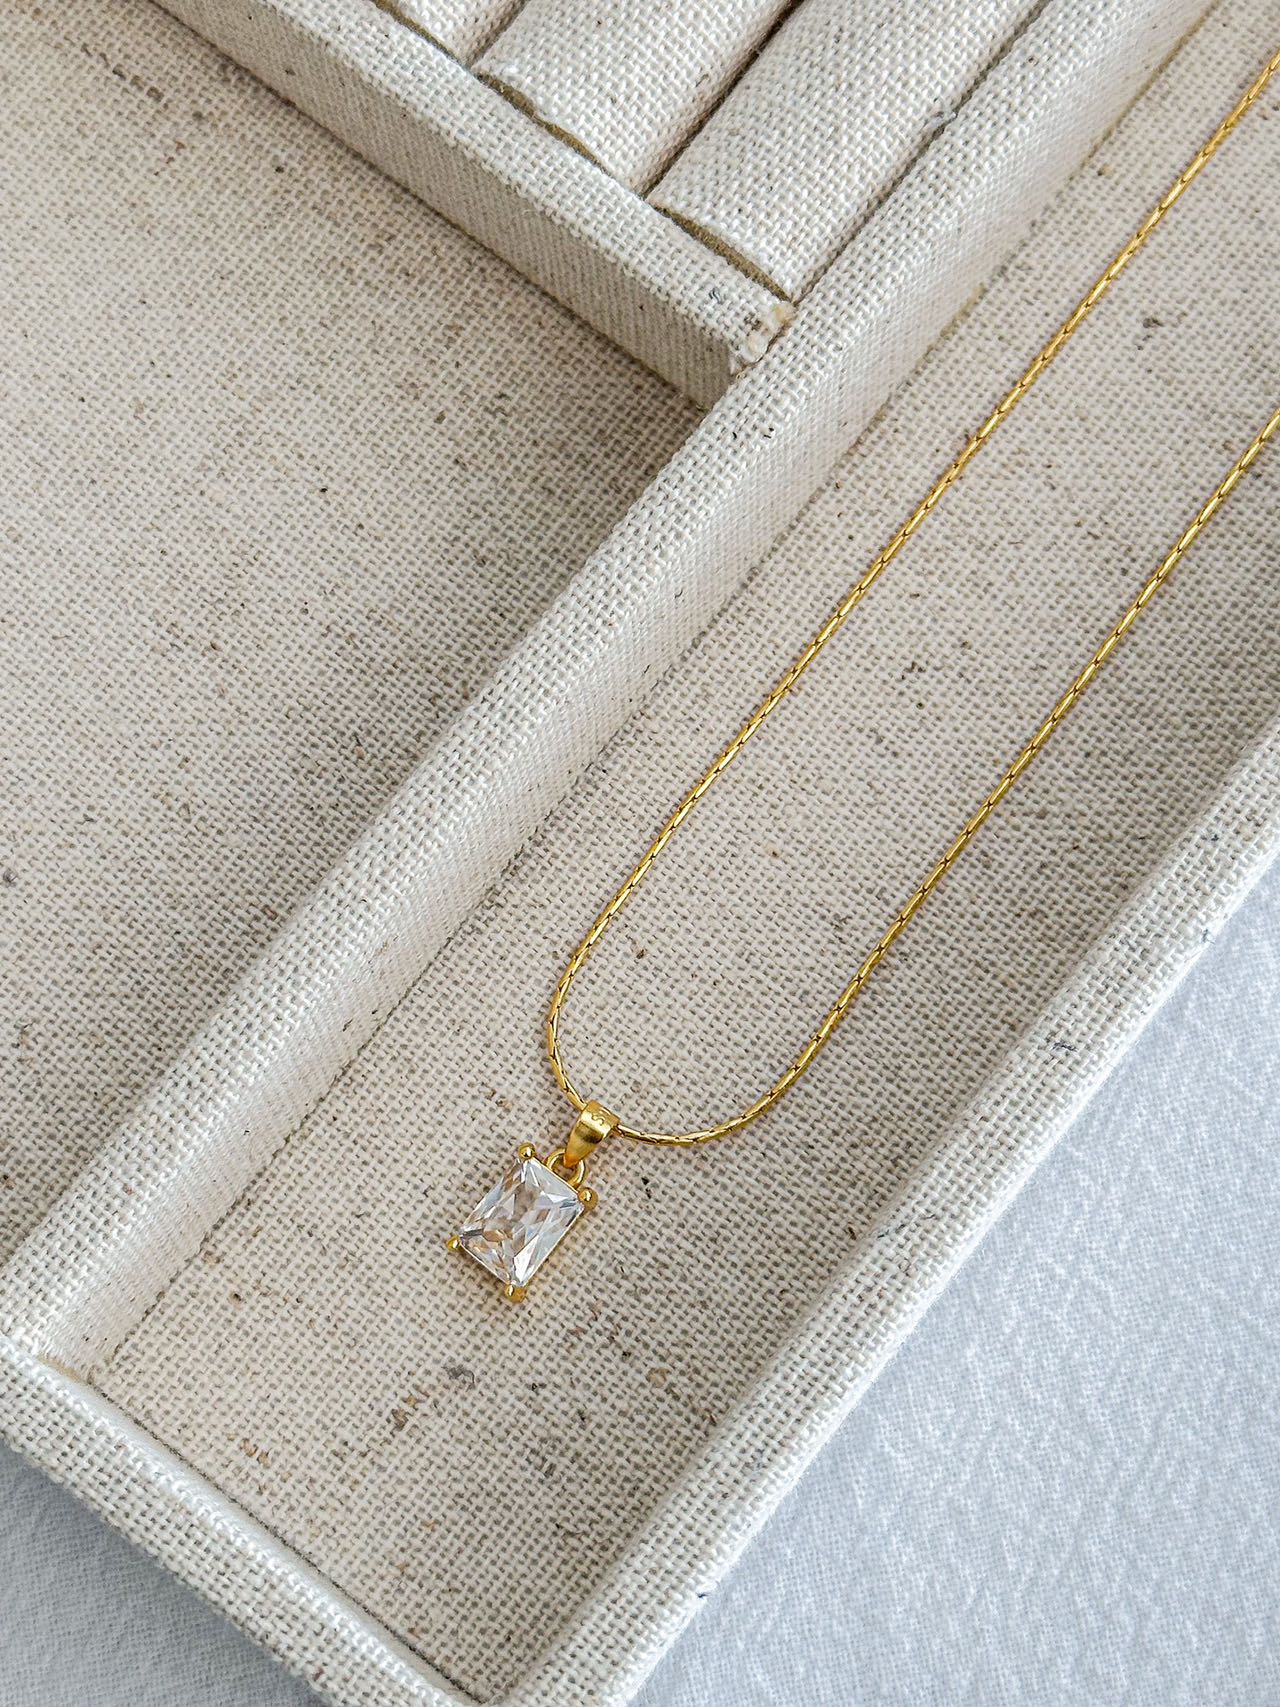 S925 Clear Rectangle Gem Gold Necklace